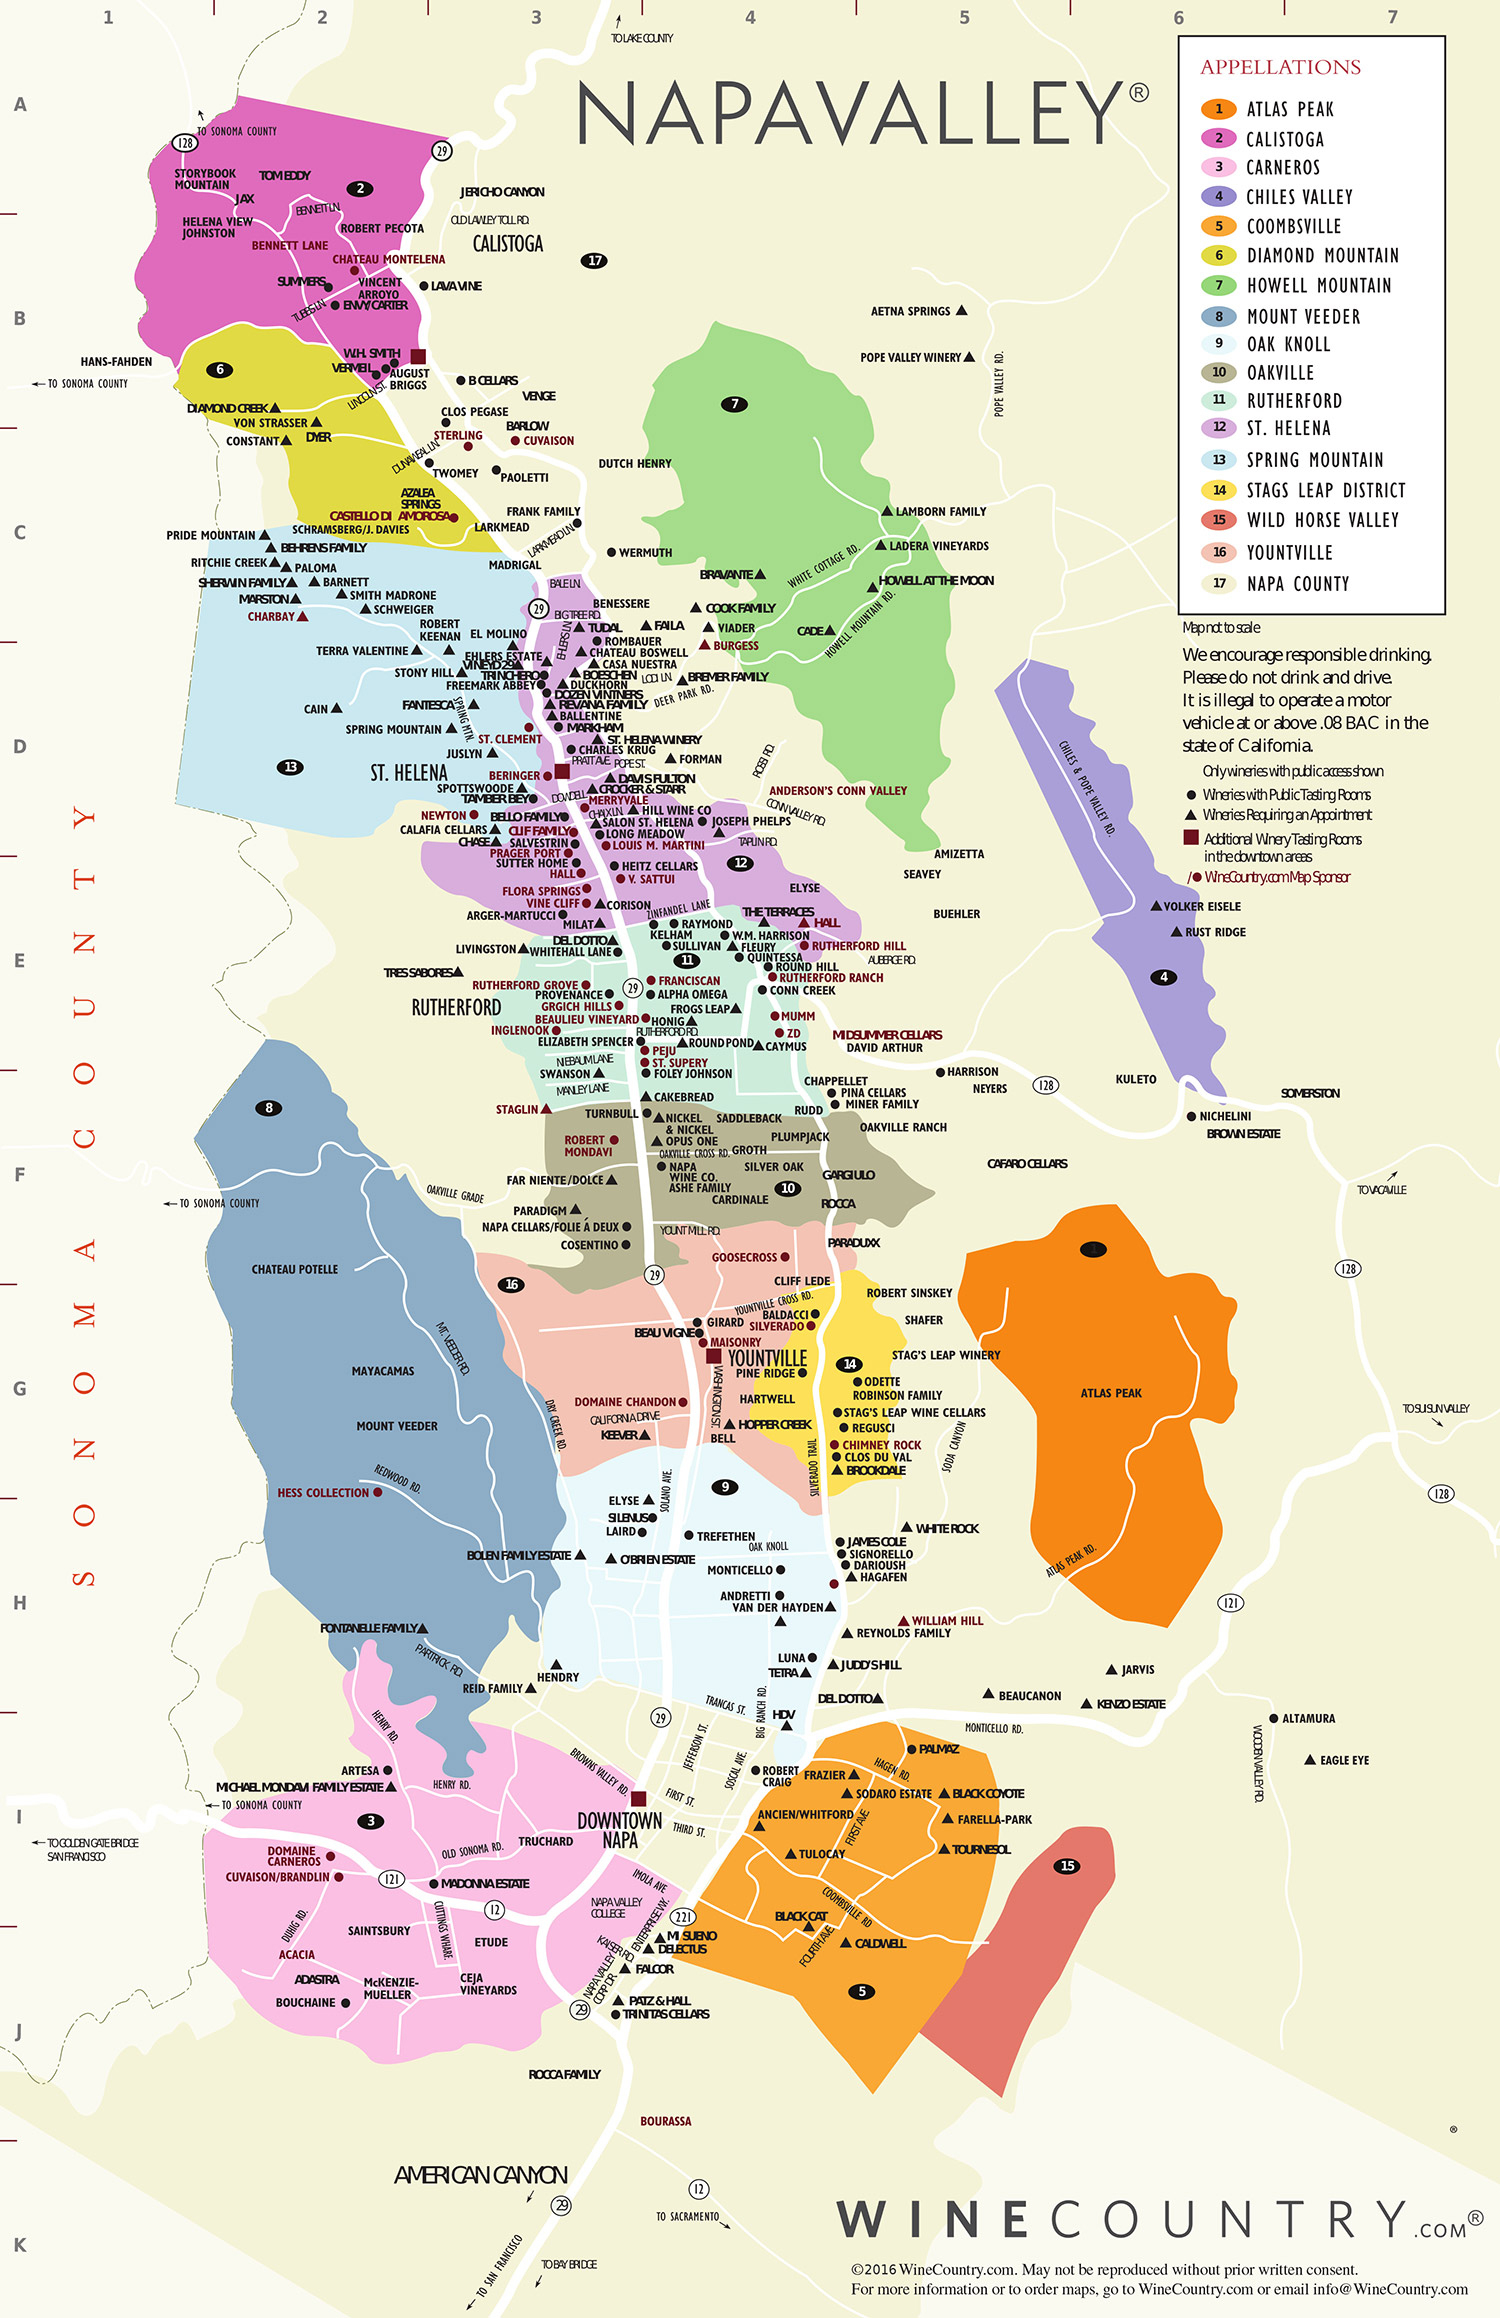 Napa Valley Winery Map A Printable Maps Map Of California Wine - Printable Napa Winery Map